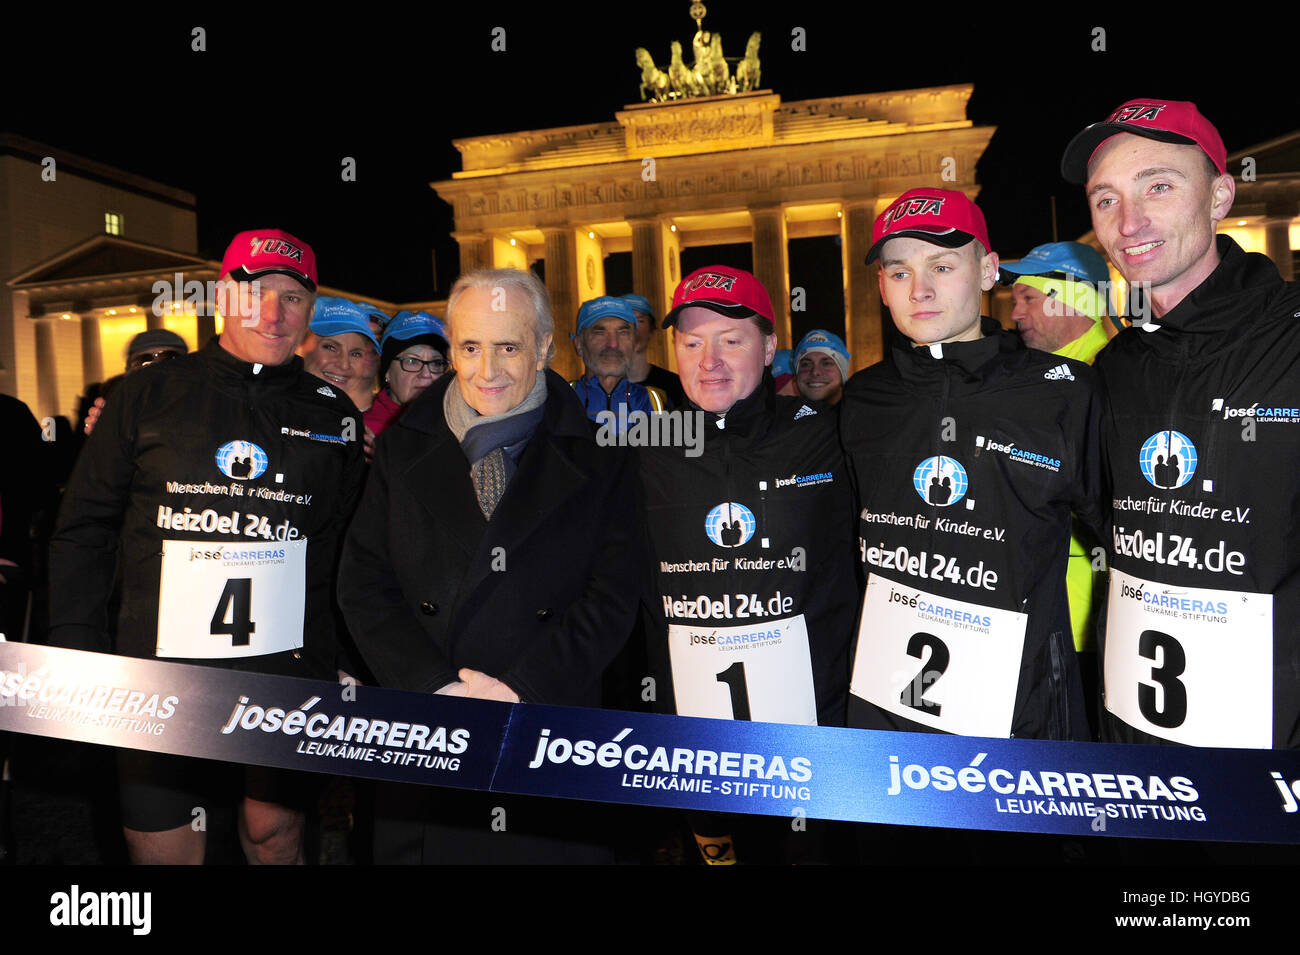 Jose Carreras starts the run with Joey Kelly along the former Berlin wall to the benefit of 'Jose Carreras Leukämie-Stiftung' at Brandenburg Gate.  Featuring: Jose Carreras, Joey Kelly, Läufer Where: Berlin, Germany When: 13 Dec 2016 Stock Photo